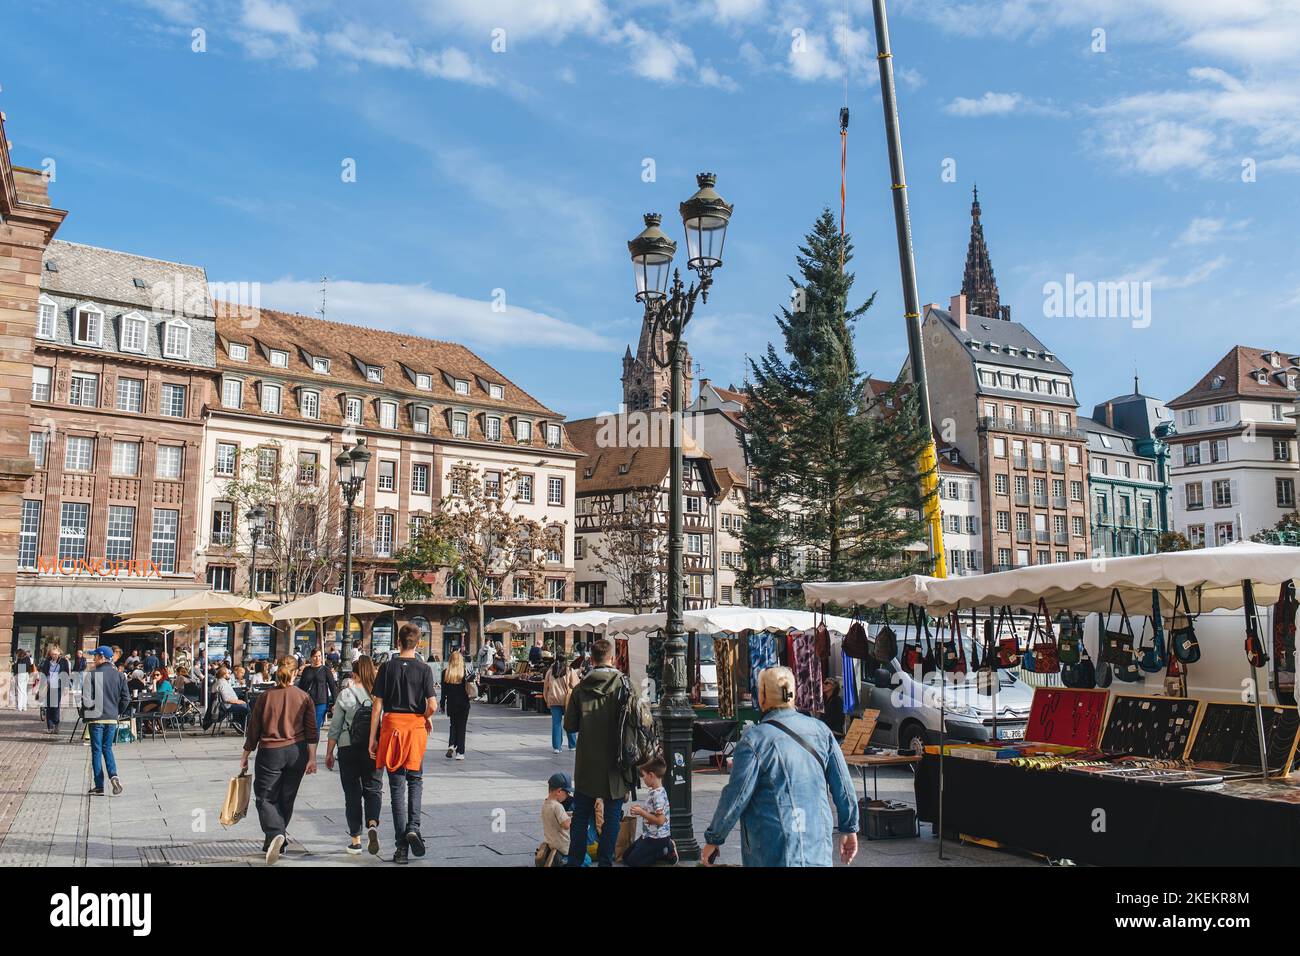 Strasbourg, France- Oct 28, 2022: Installation of Christmas Tree in place Kleber for the upcoming annual Christmas Market Stock Photo